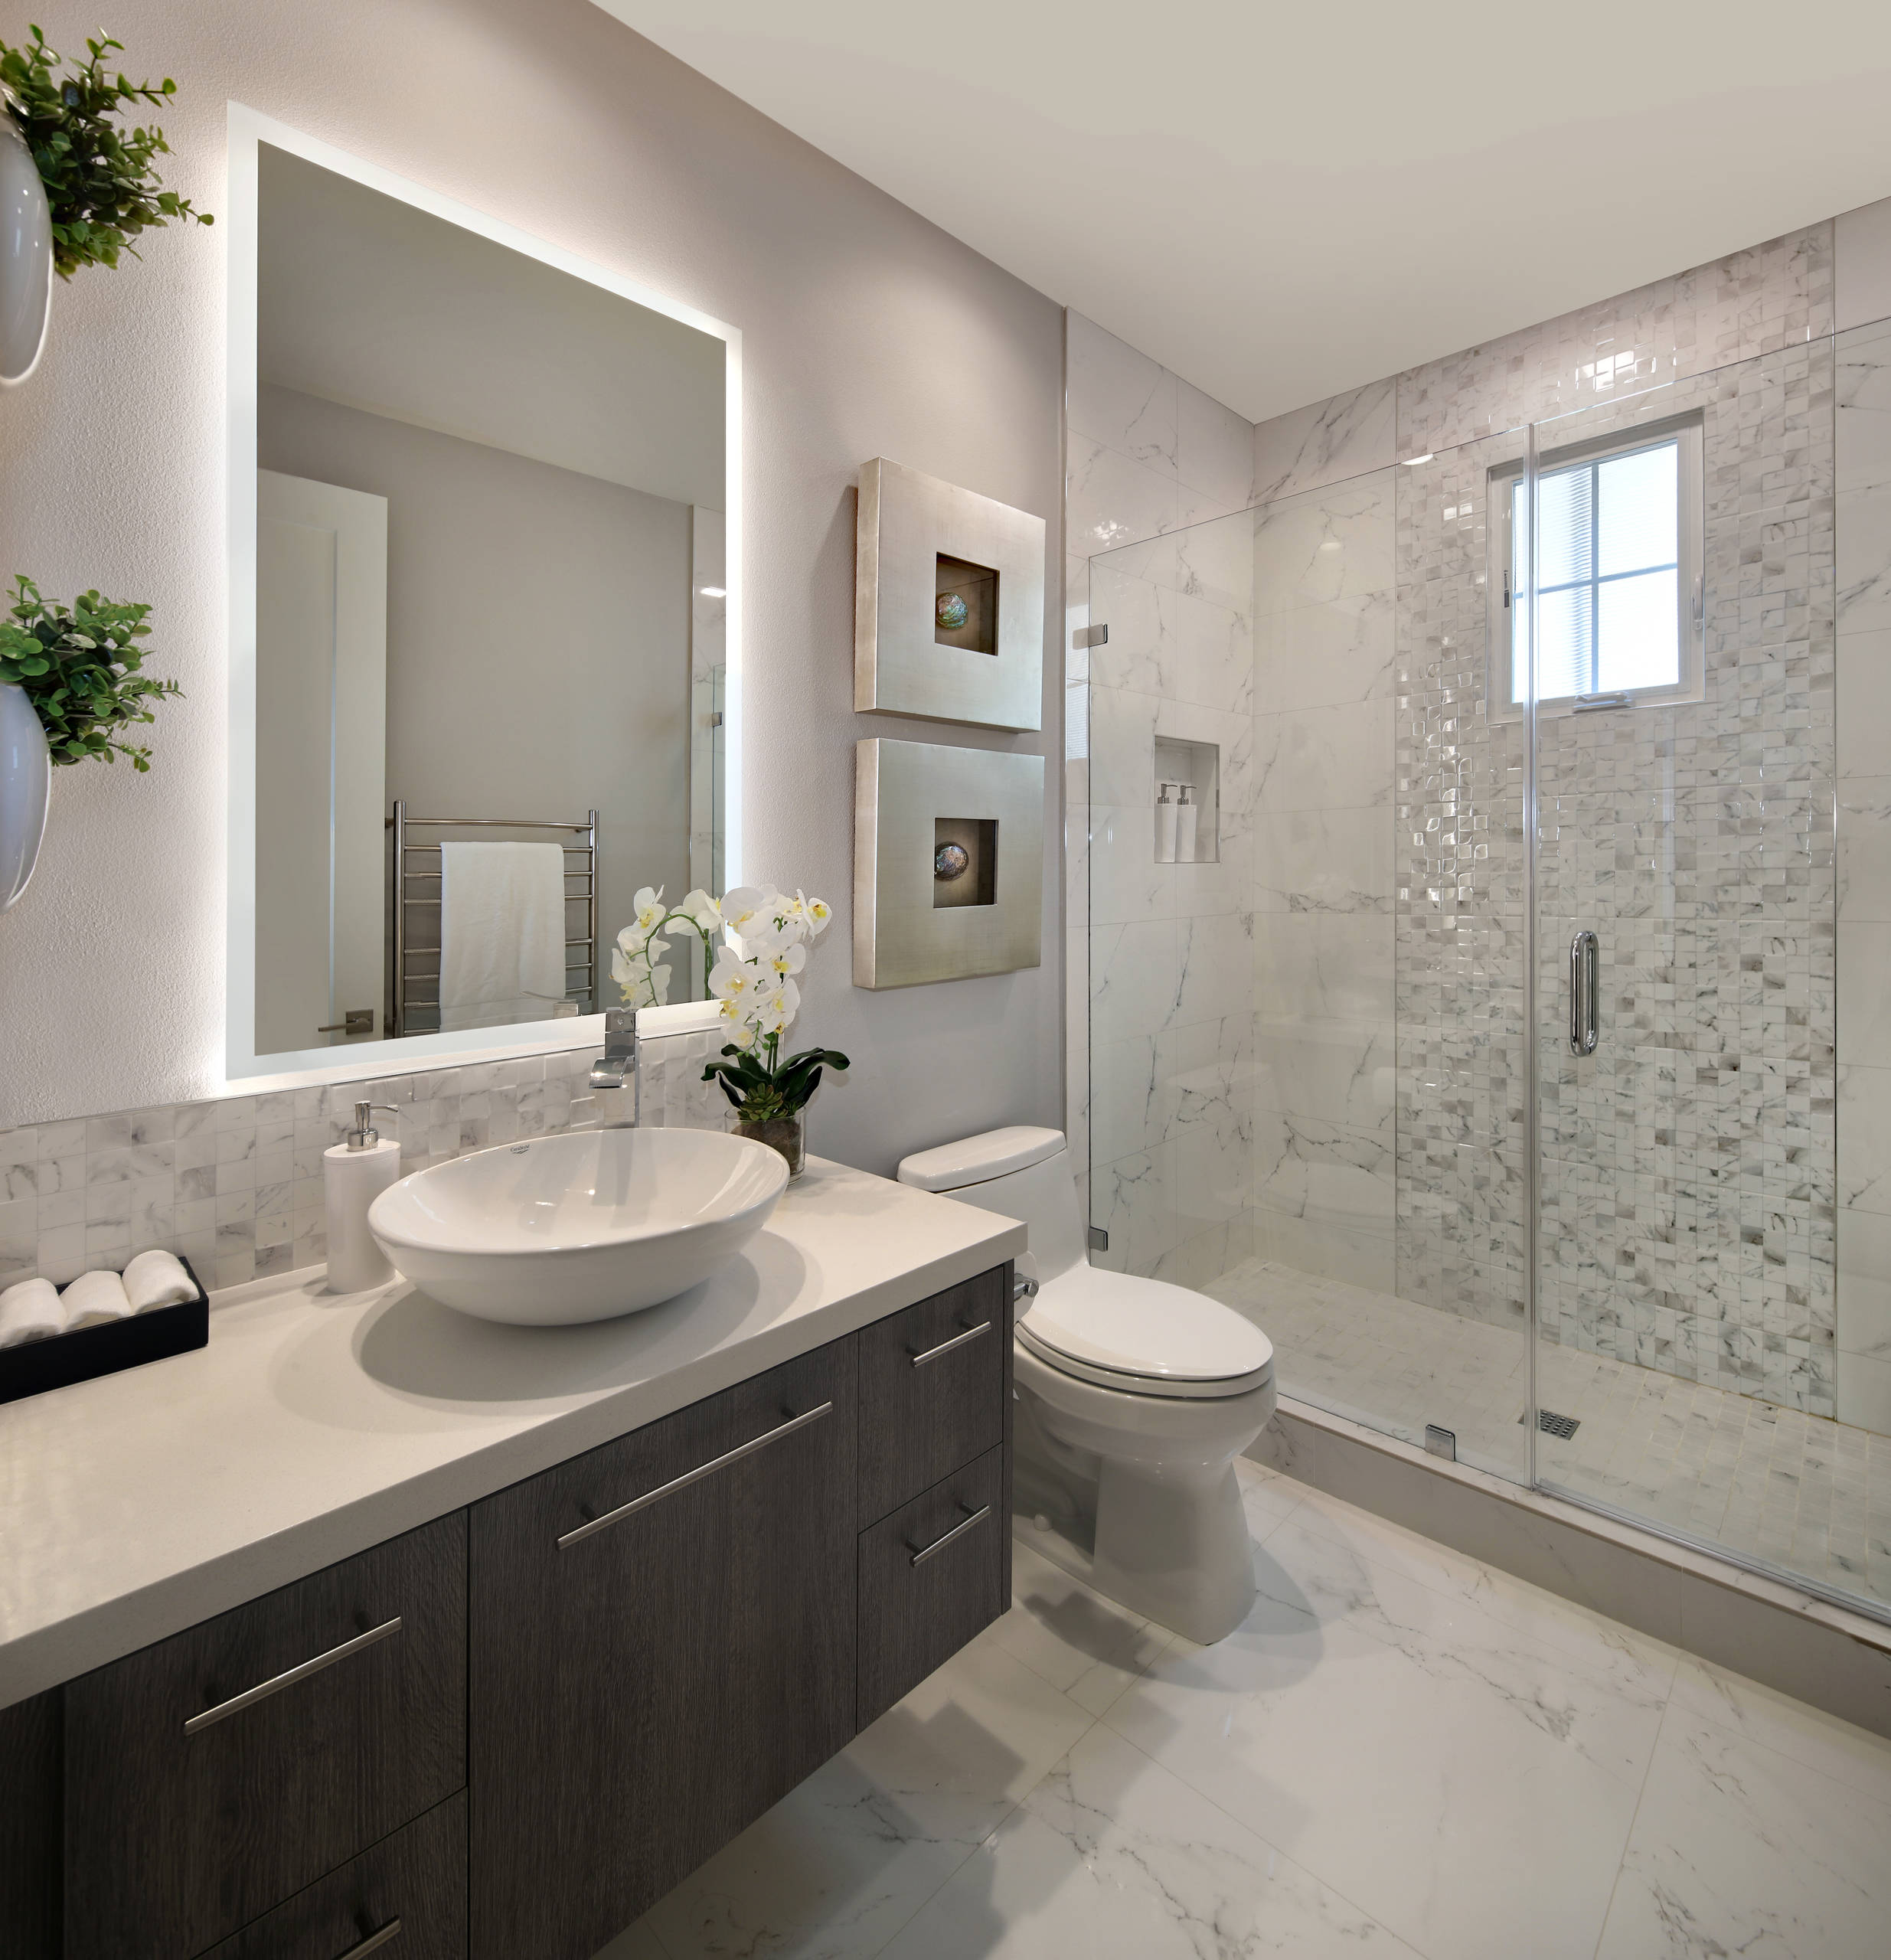 Modern Bathroom Ideas Images Image Of Bathroom And Closet,Research Methods Design And Analysis